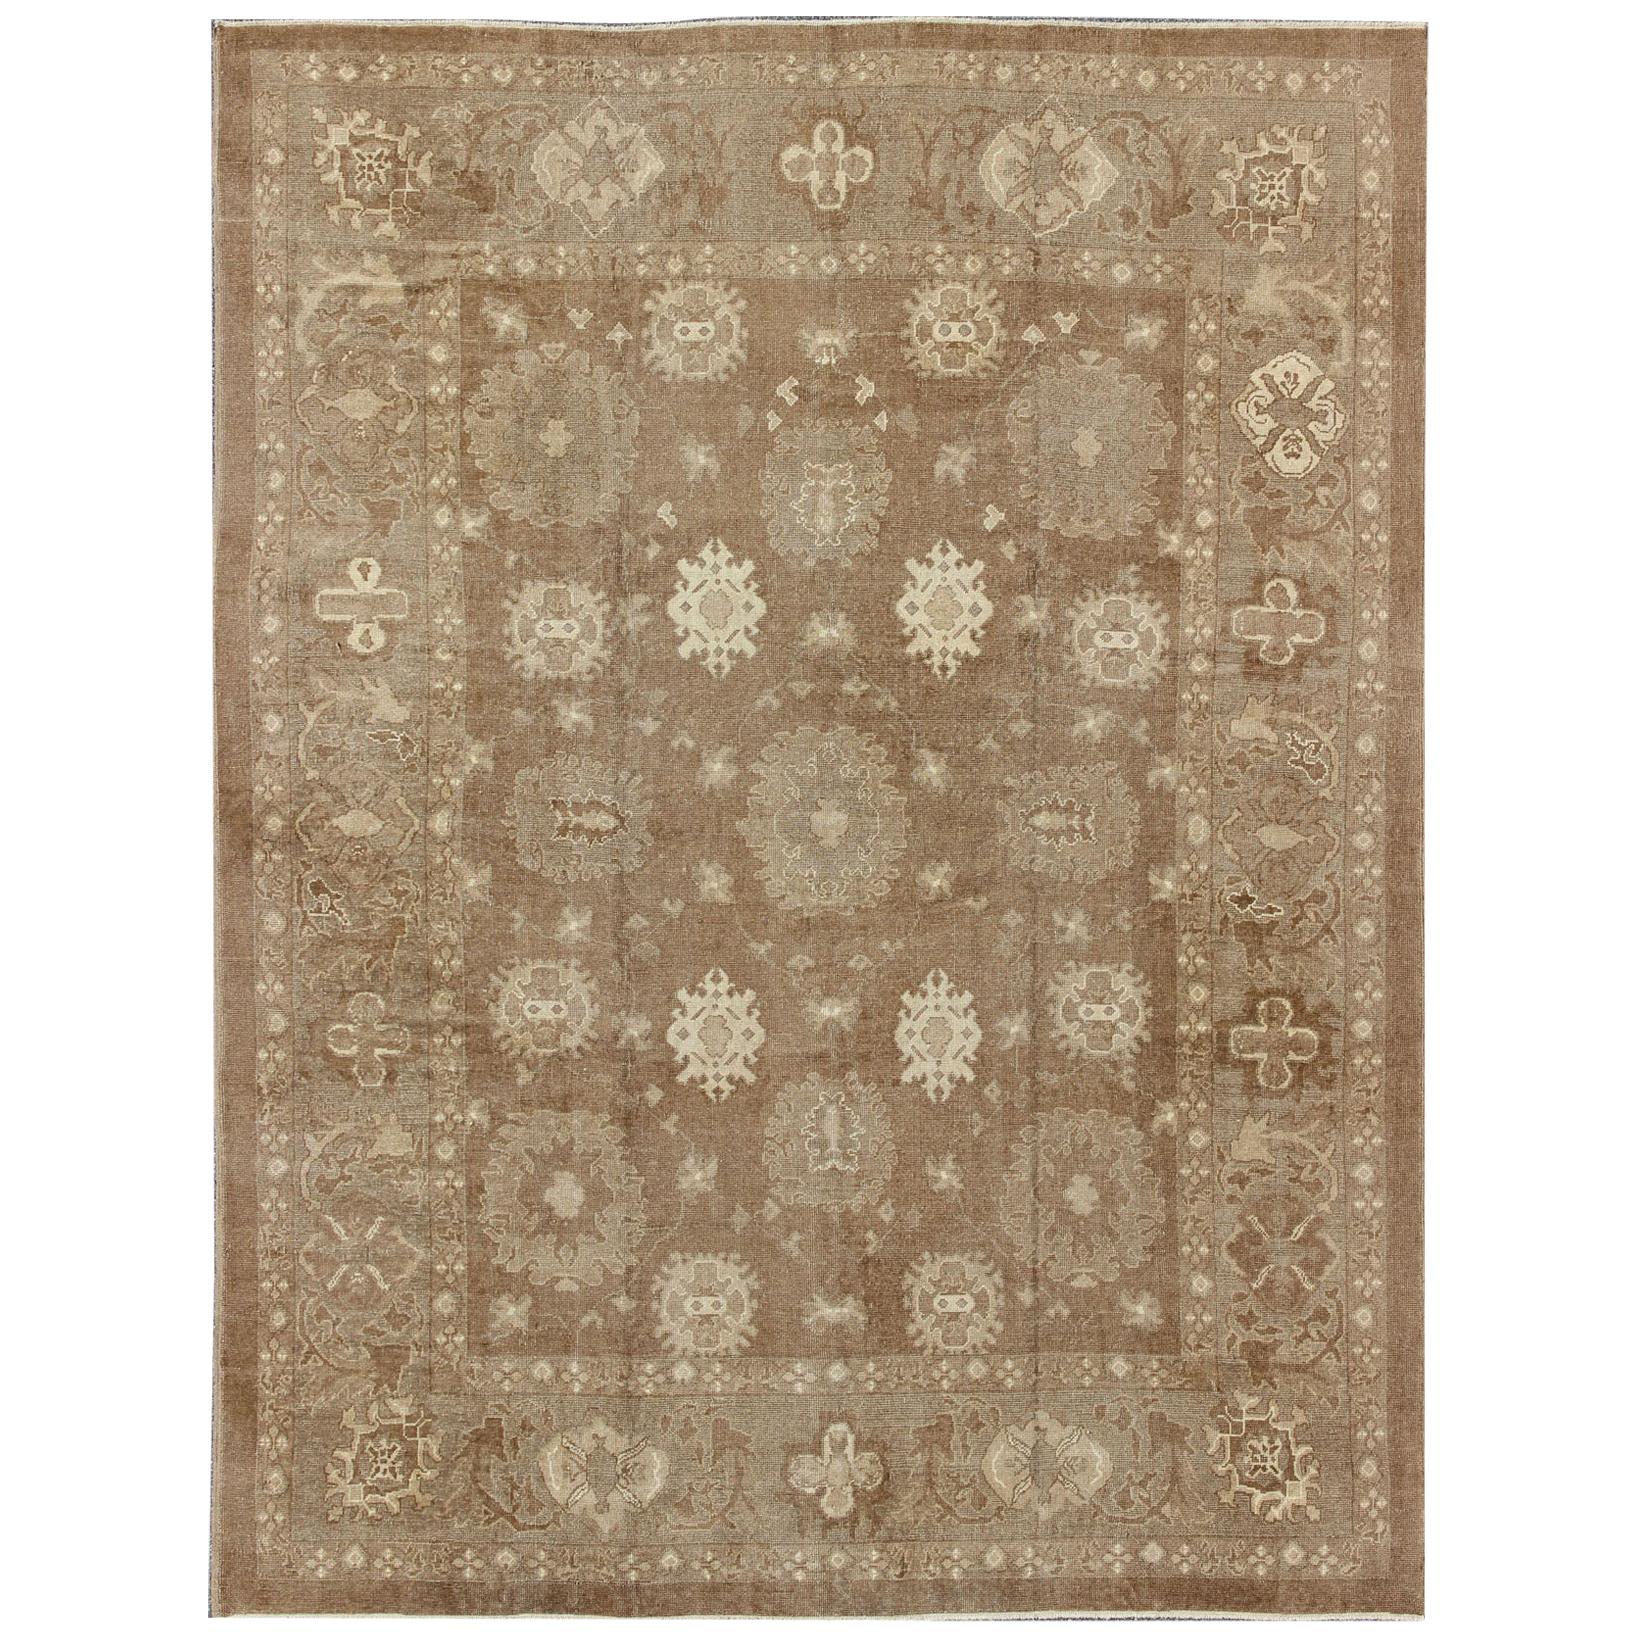 Large Vintage Turkish Rug in Light Brown Field, Taupe, Ivory and Earth Tones   For Sale